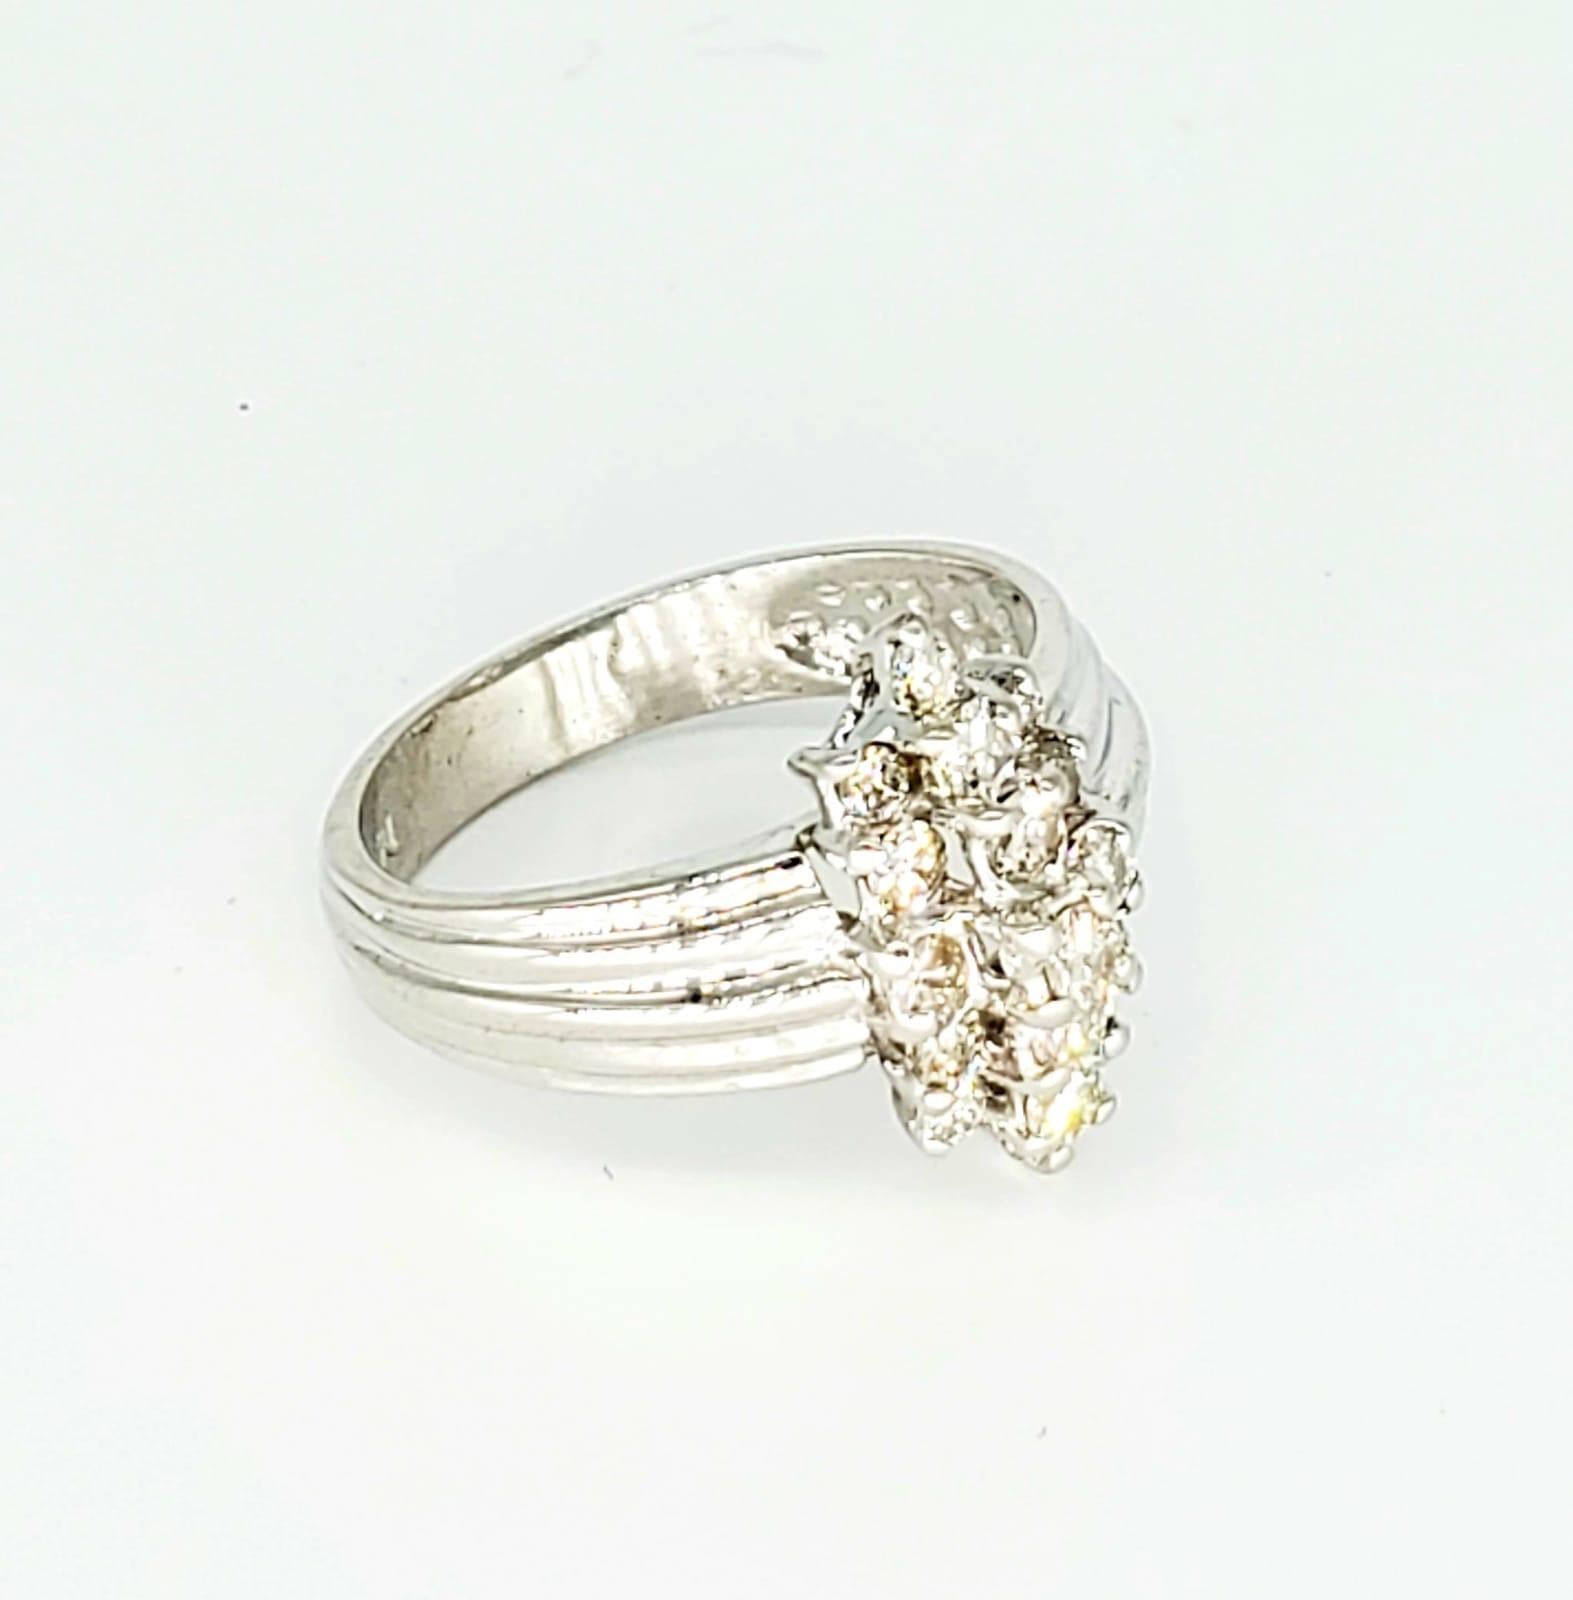 Vintage 1.70 Carat Diamonds Cluster Ring 14k White Gold. The ring is a size 8 and weights 4.9 grams.